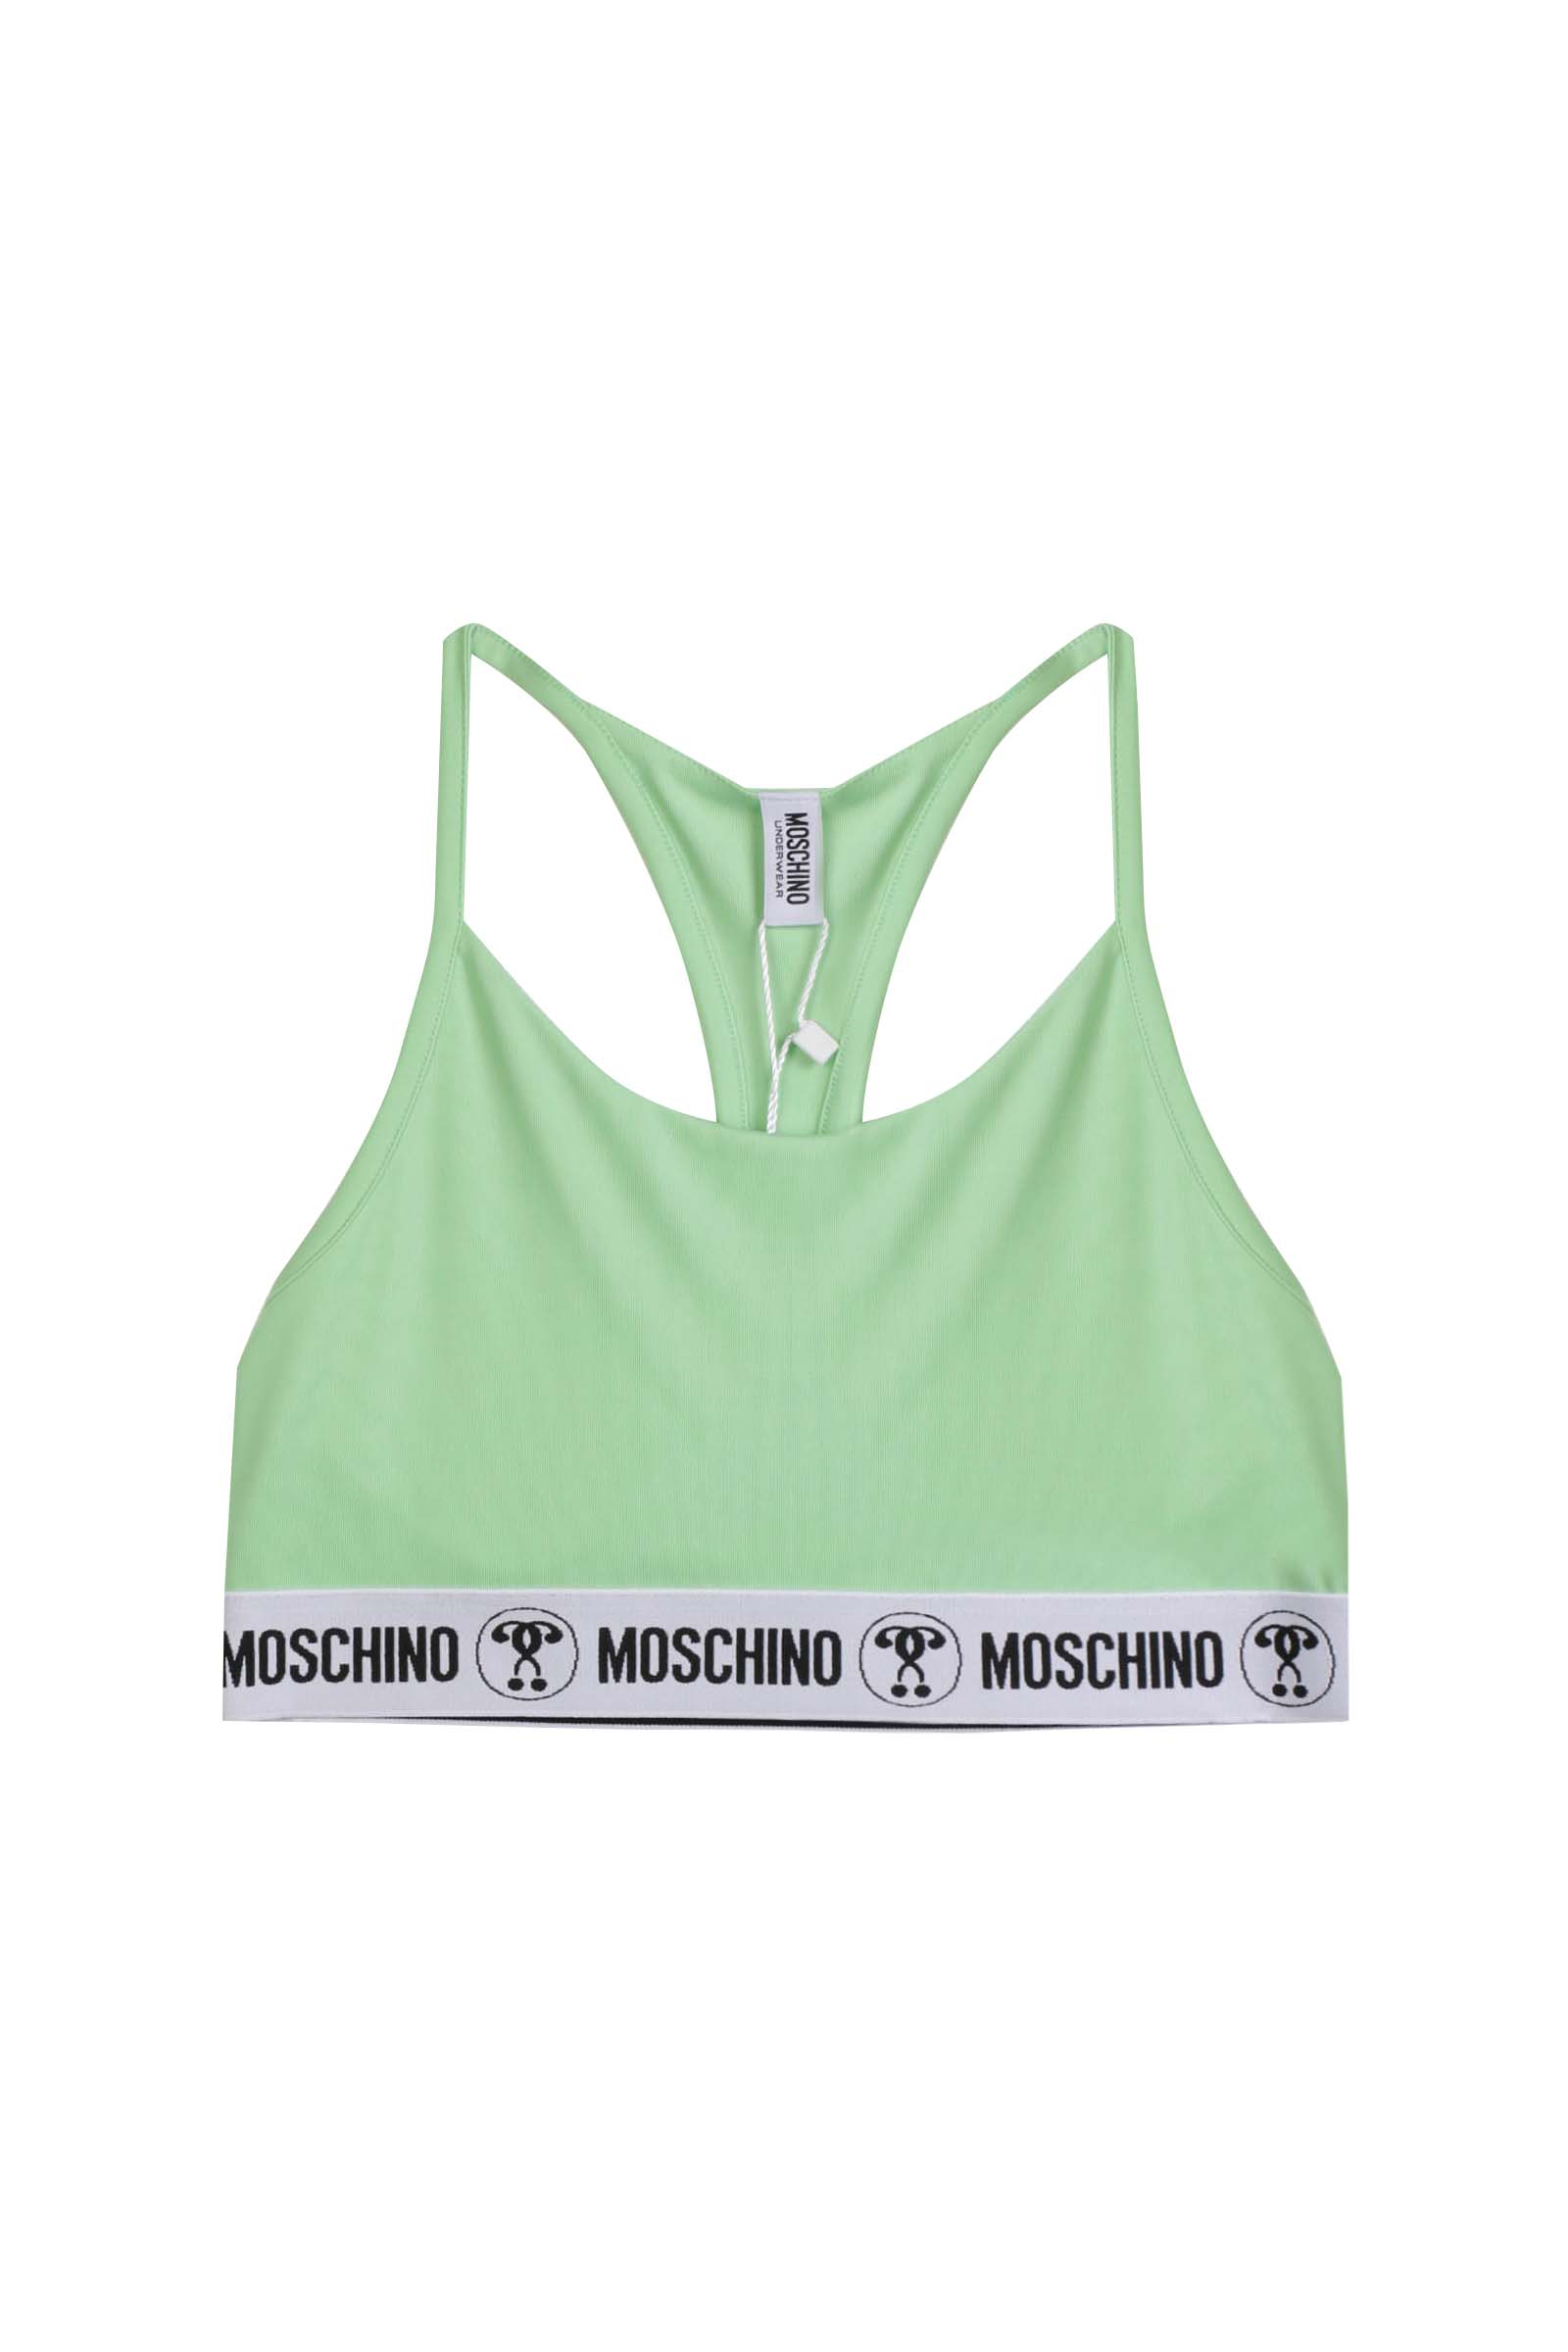 MOSCHINO TOP A0803 4602 449 DONNA